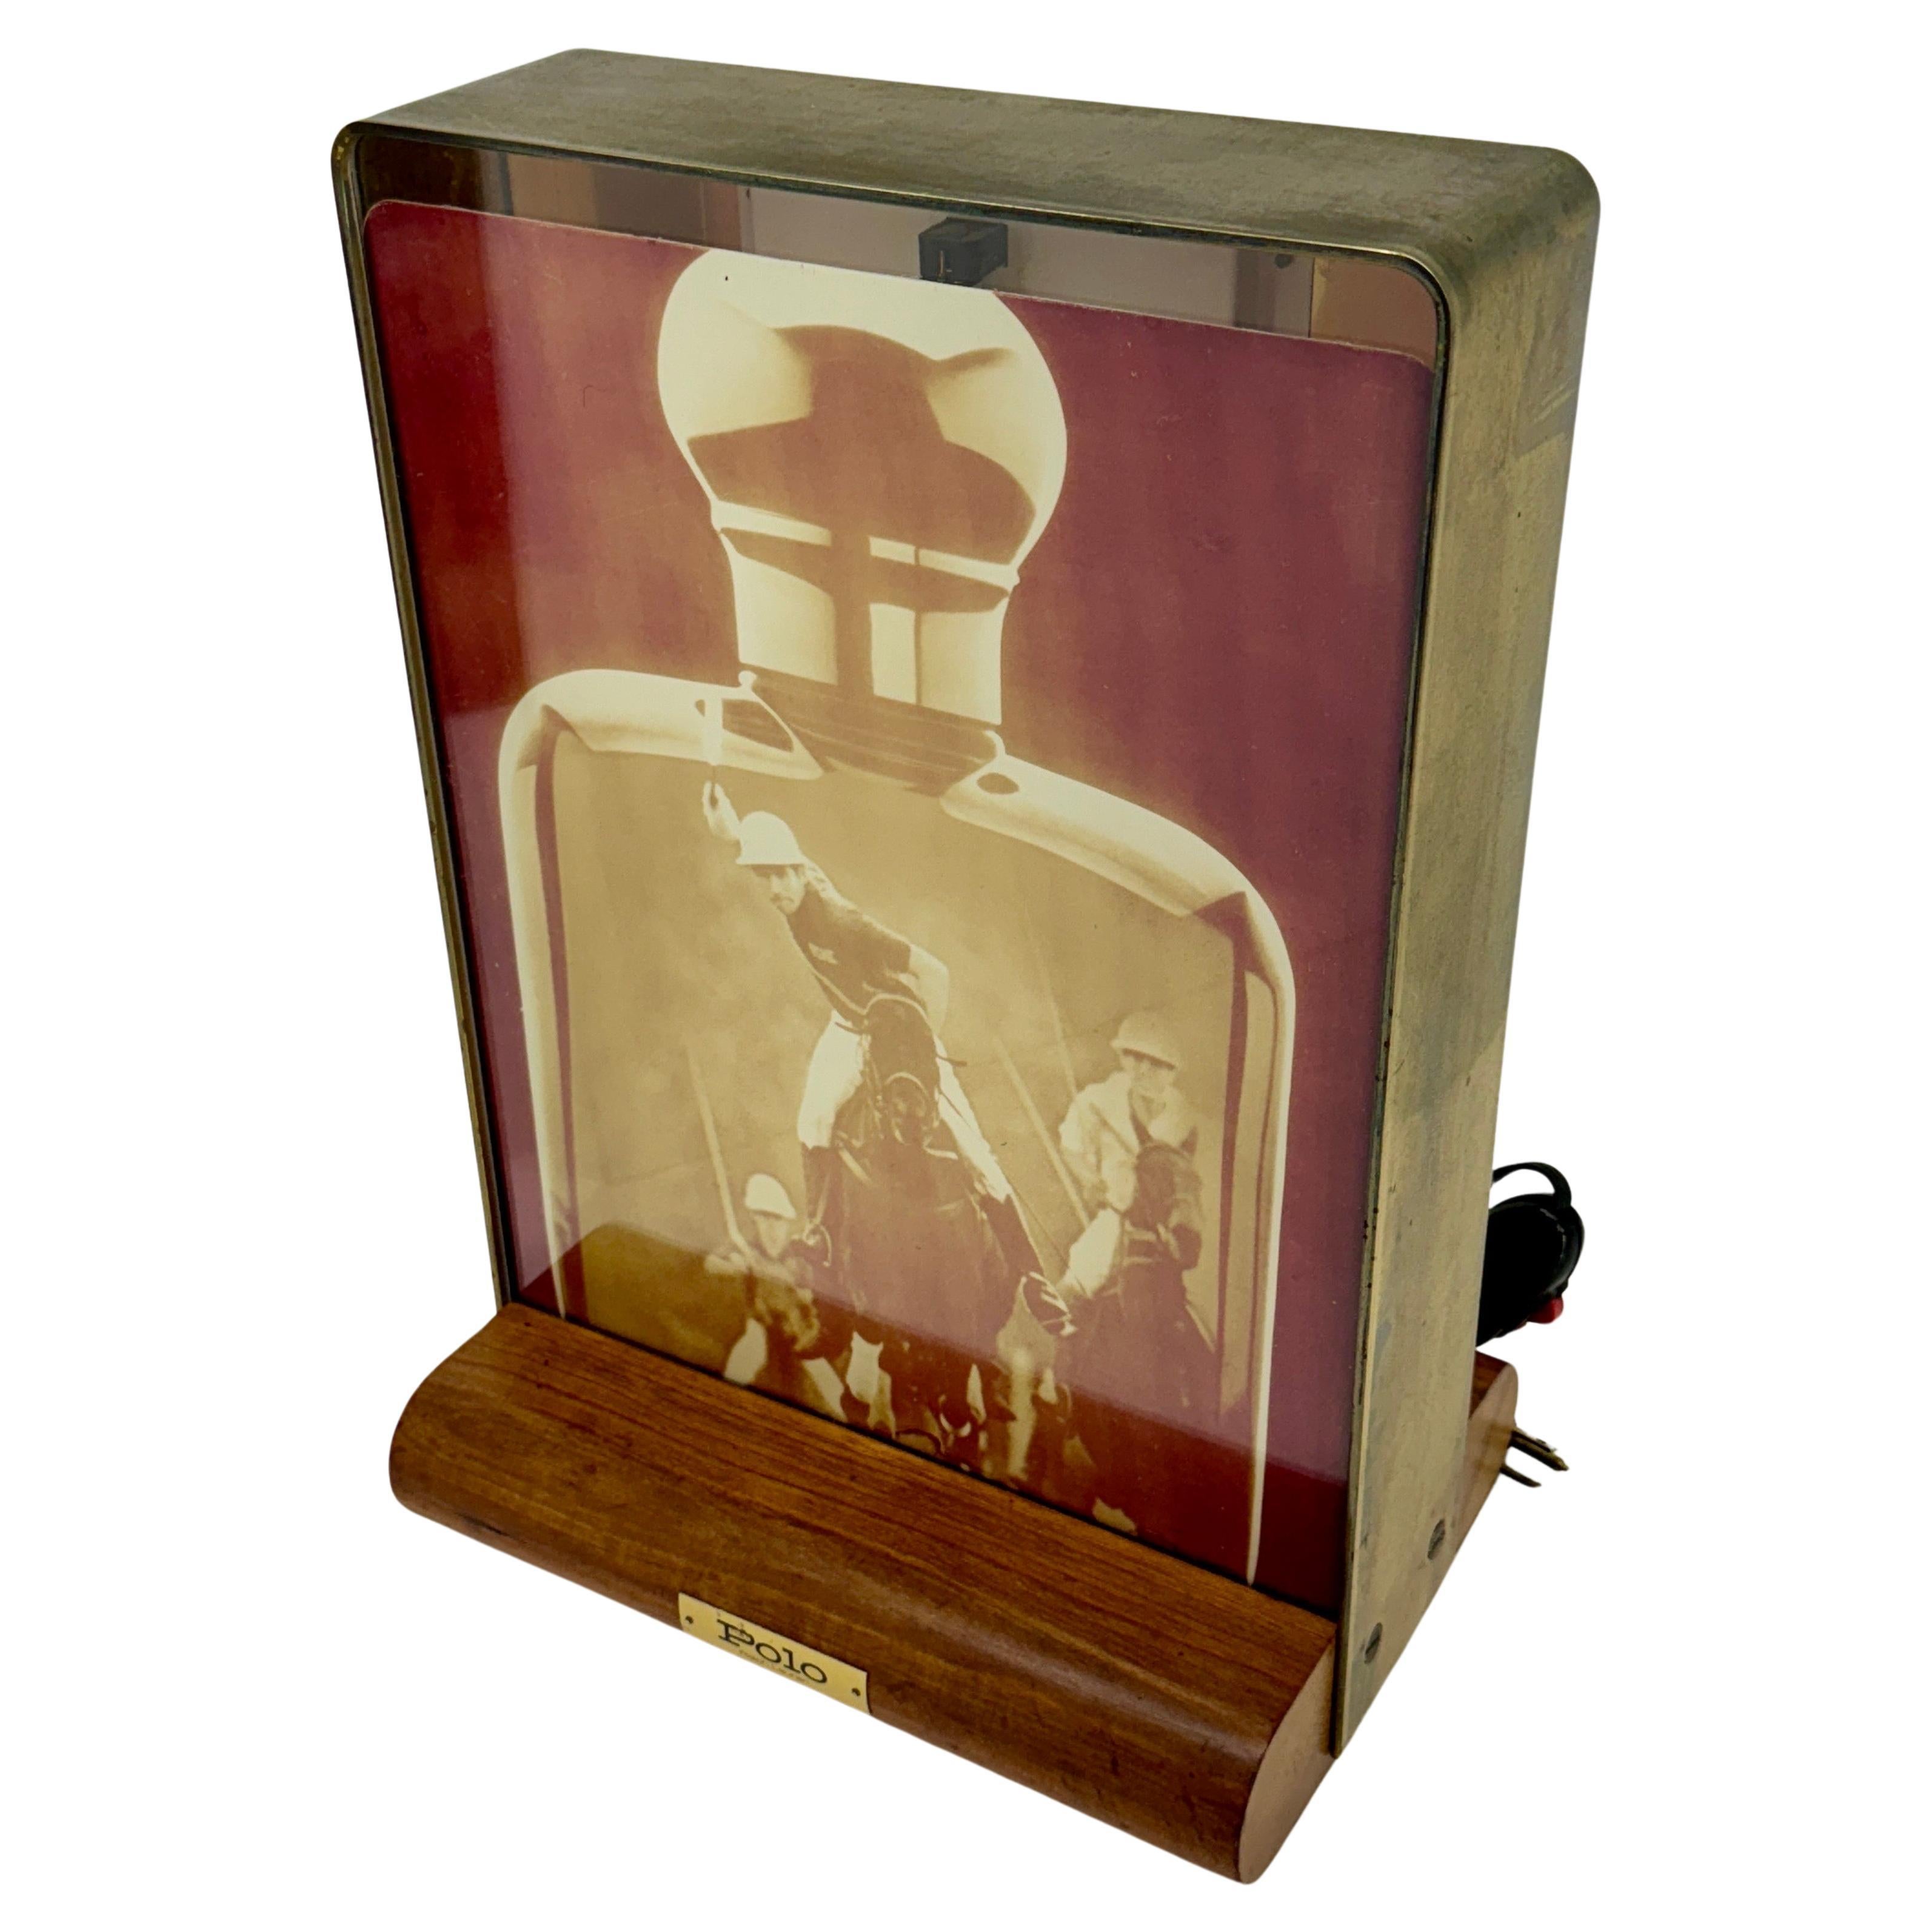 Ralph Lauren Polo Advertisement Store Display Light

Mid-Century Wooden Table Light from Ralph Lauren with Unbeatable Patina. 
This vintage Polo tabletop light makes a wonderful statement piece for the collector of this iconic brand. The working